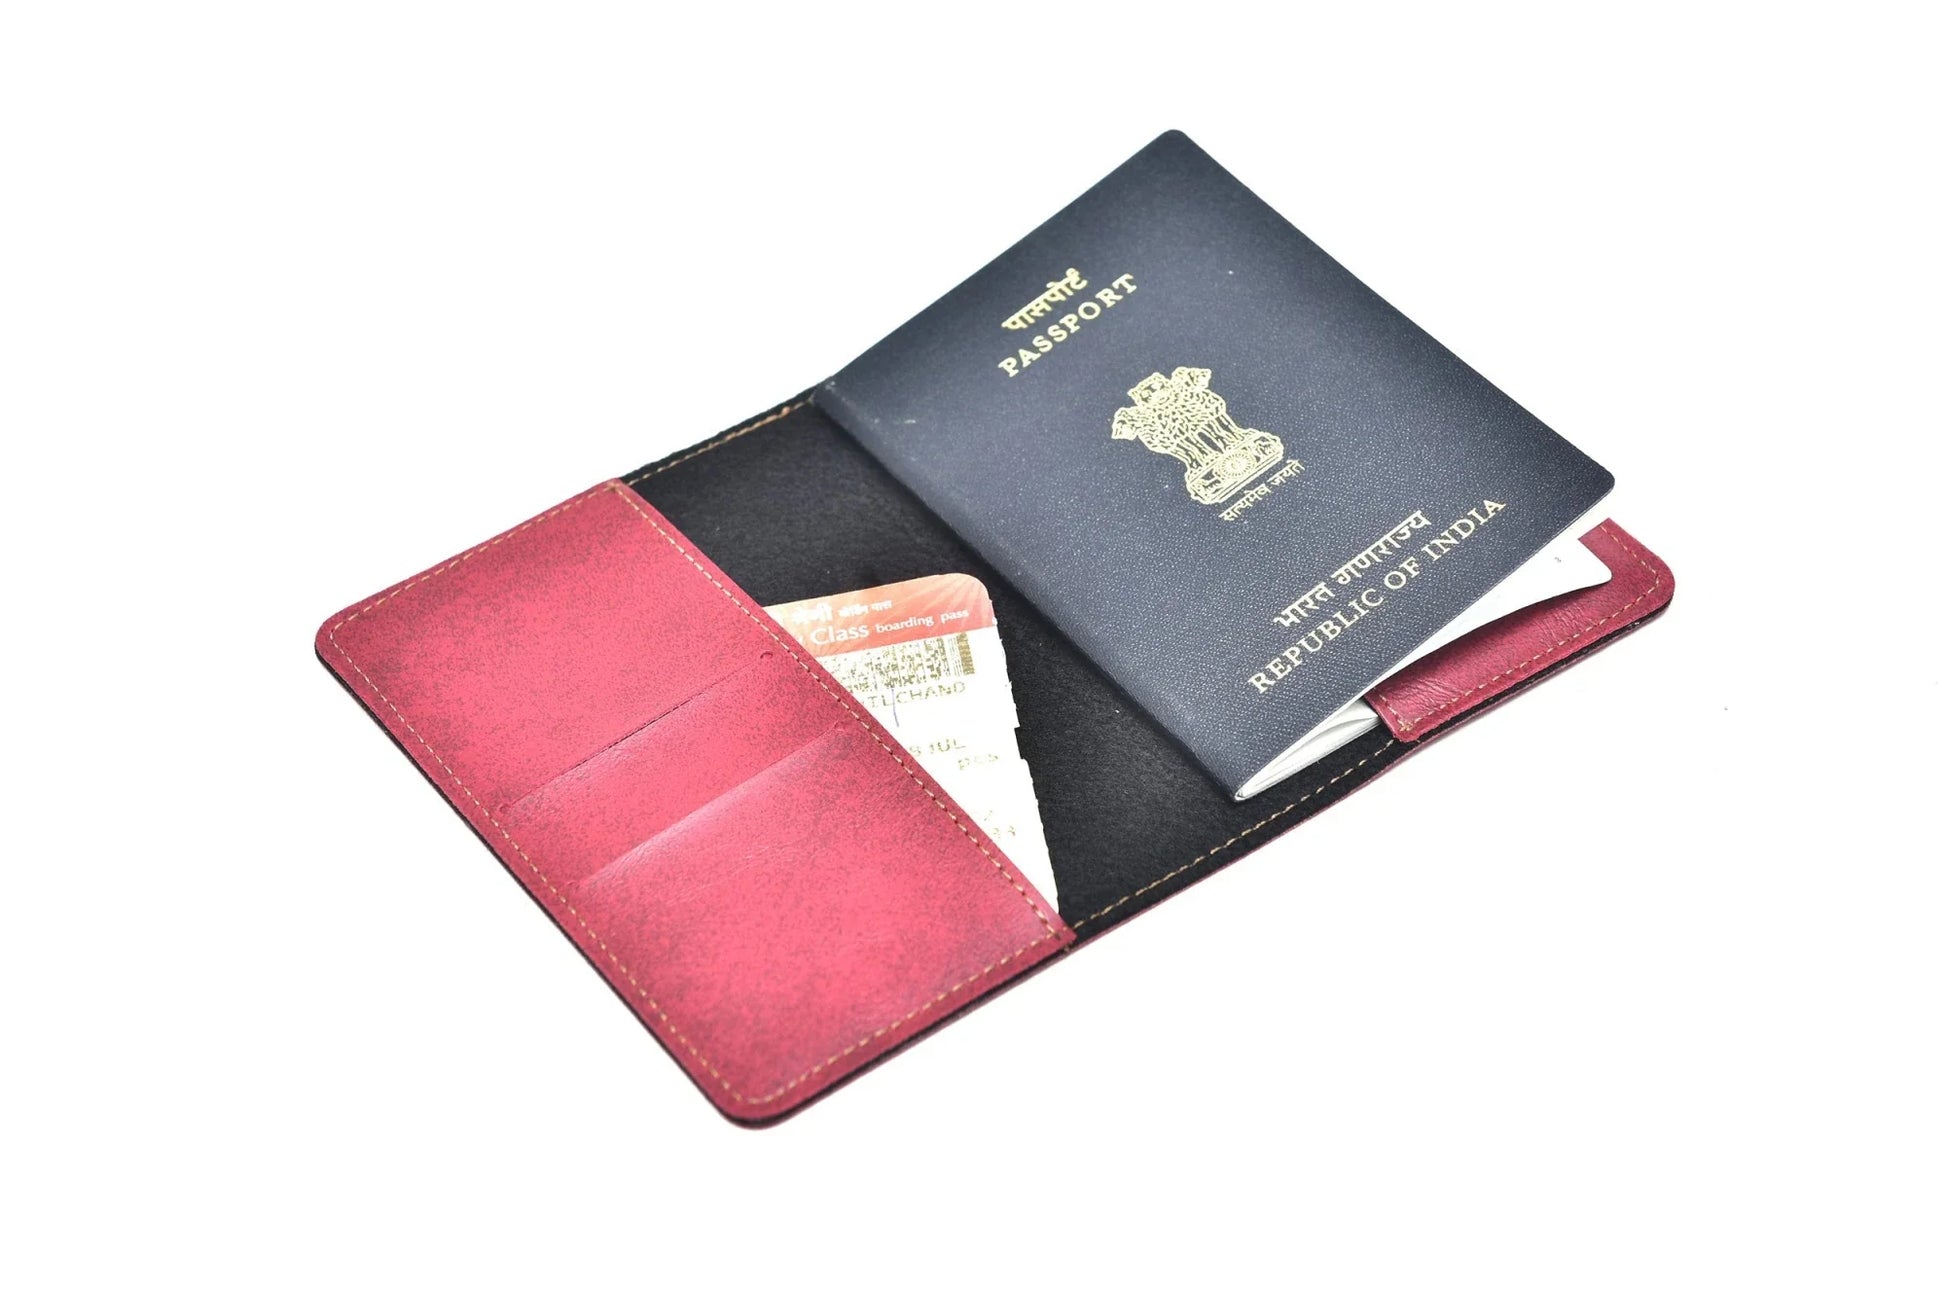 Inside or open view of maroon passport cover